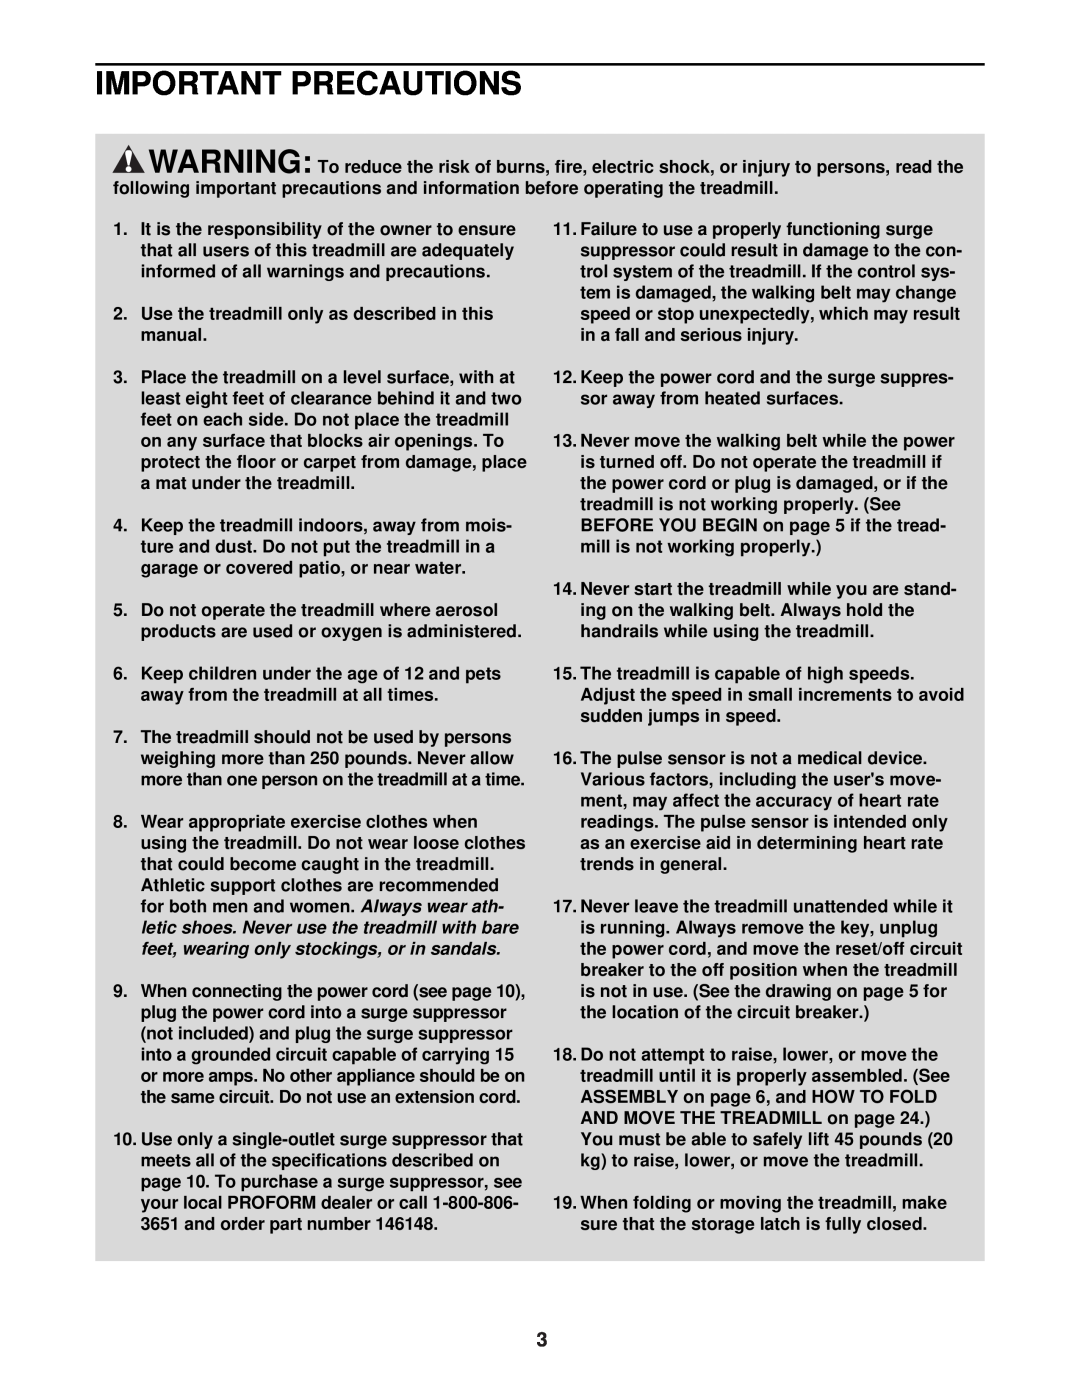 ProForm DTL72940 user manual Important Precautions, Use the treadmill only as described in this manual 